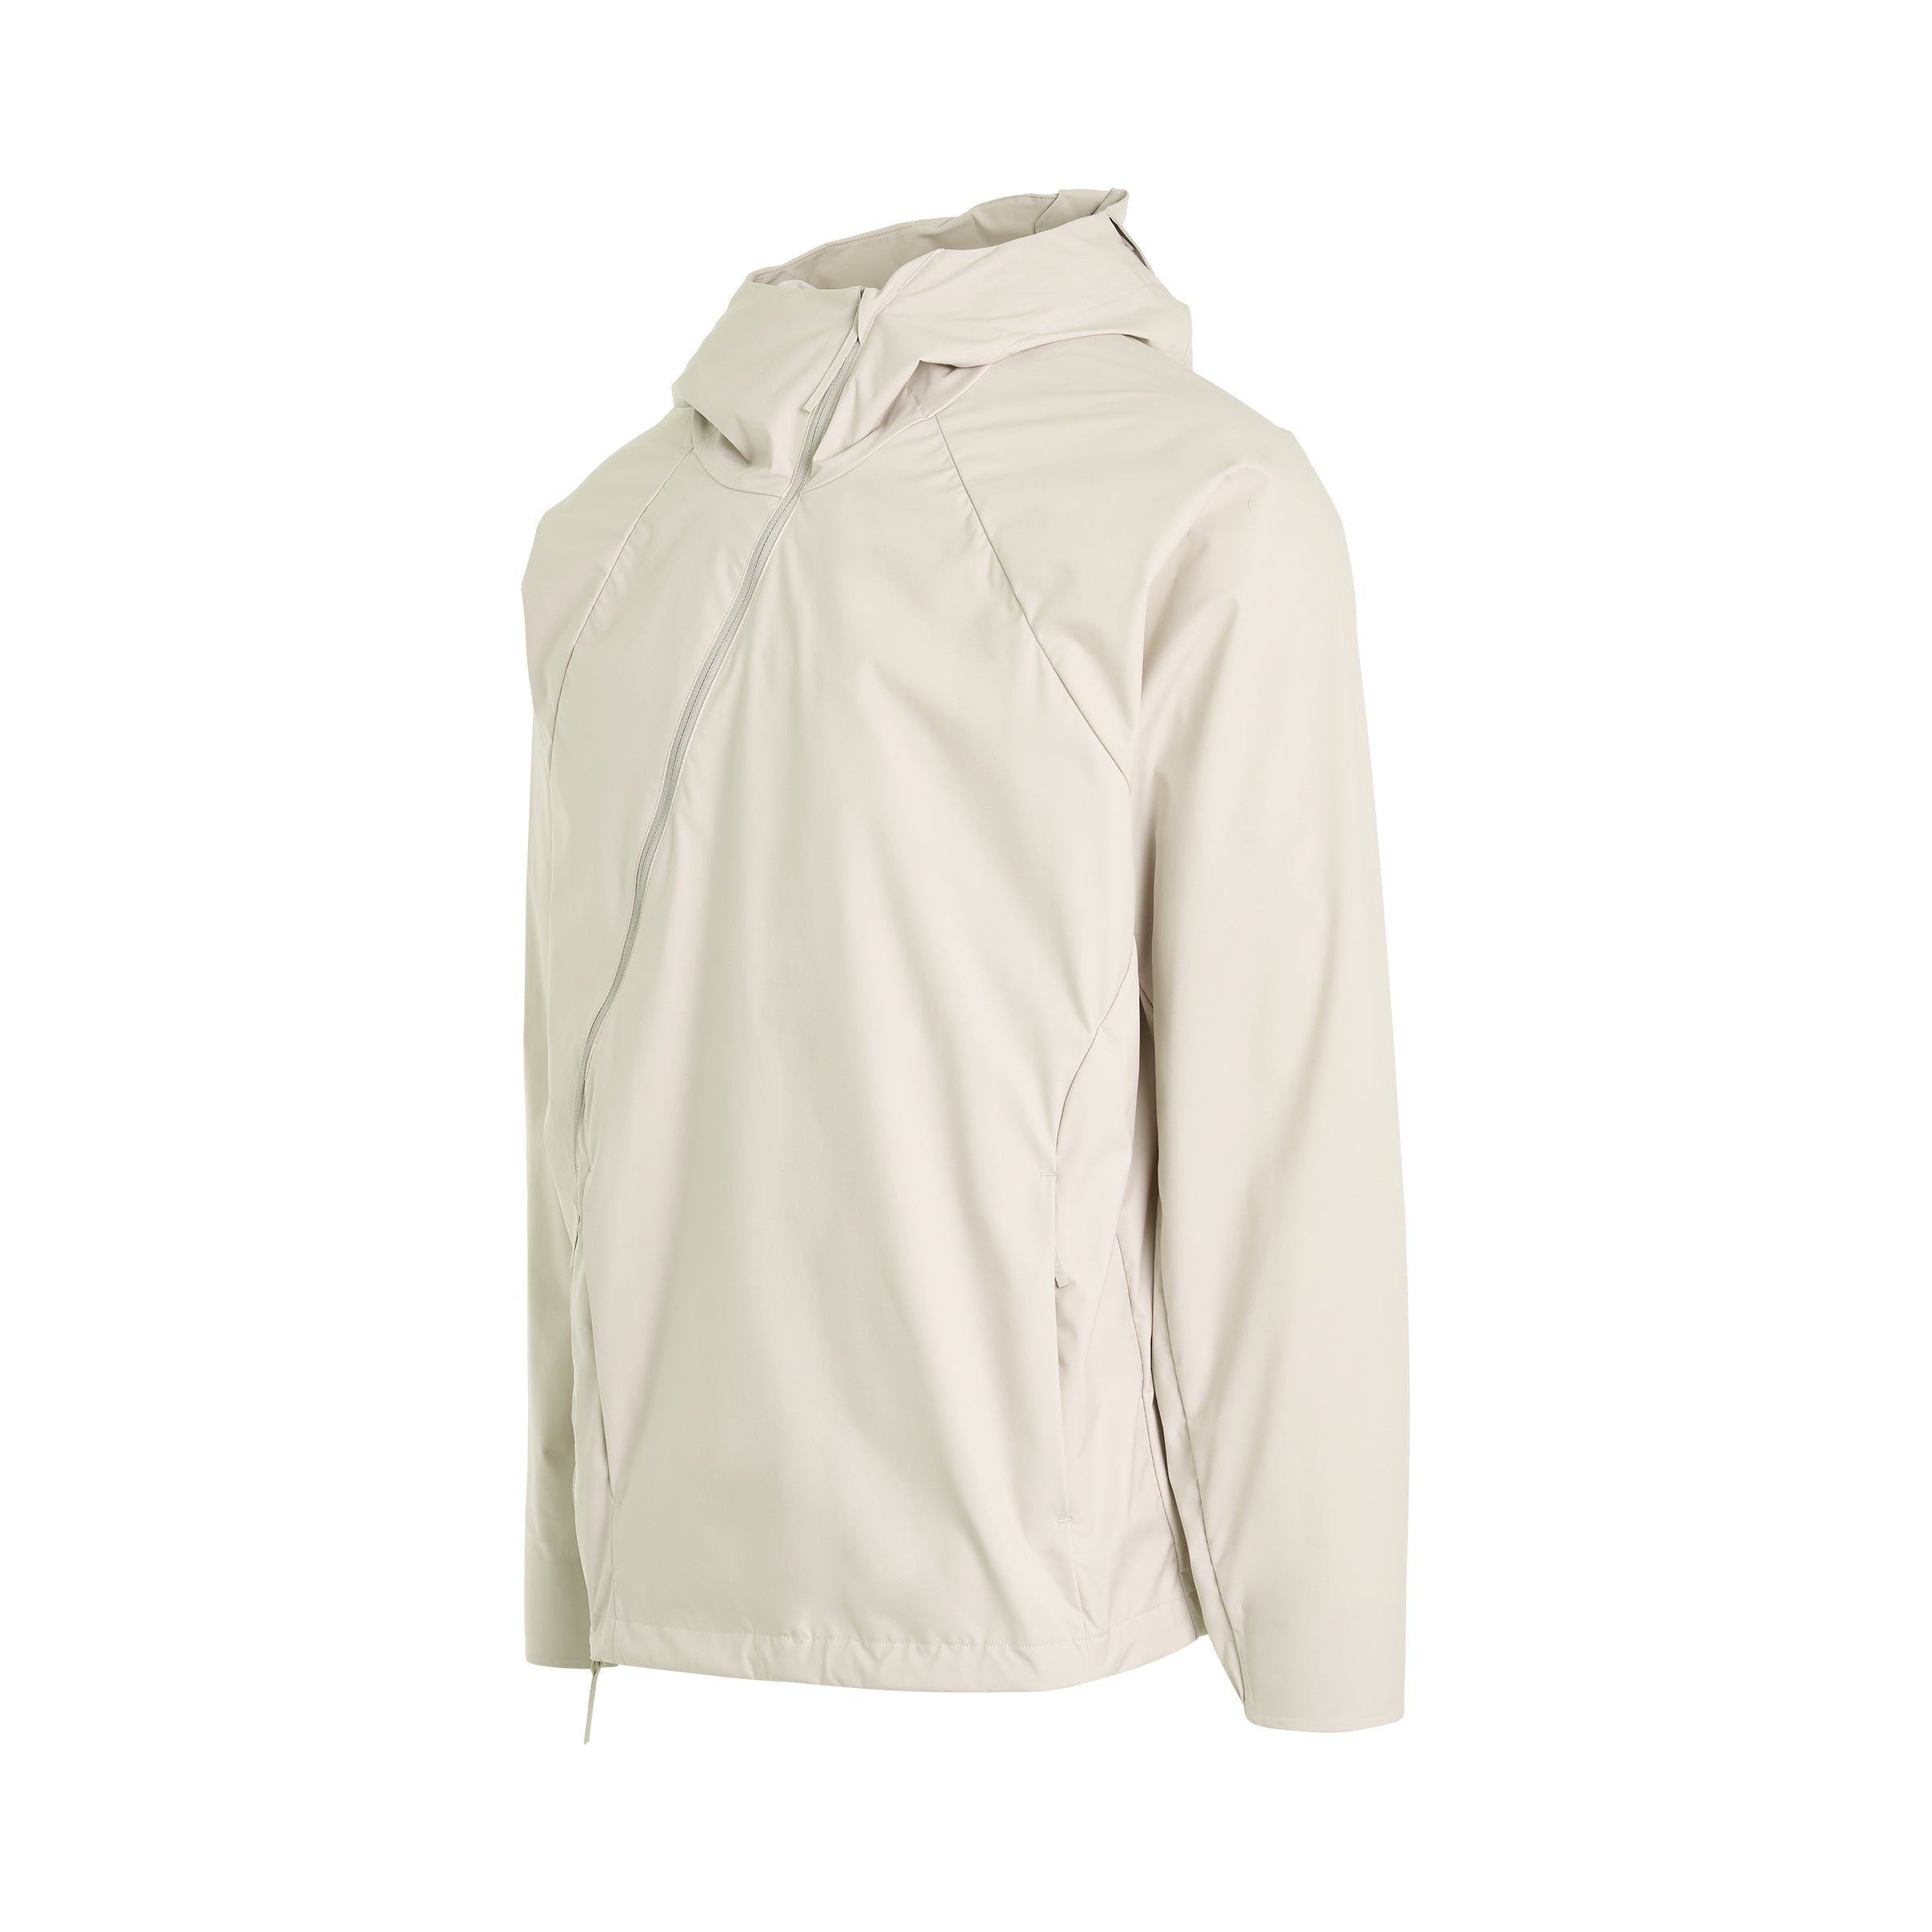 6.0 Technical Jacket (Center) in Ivory - 2